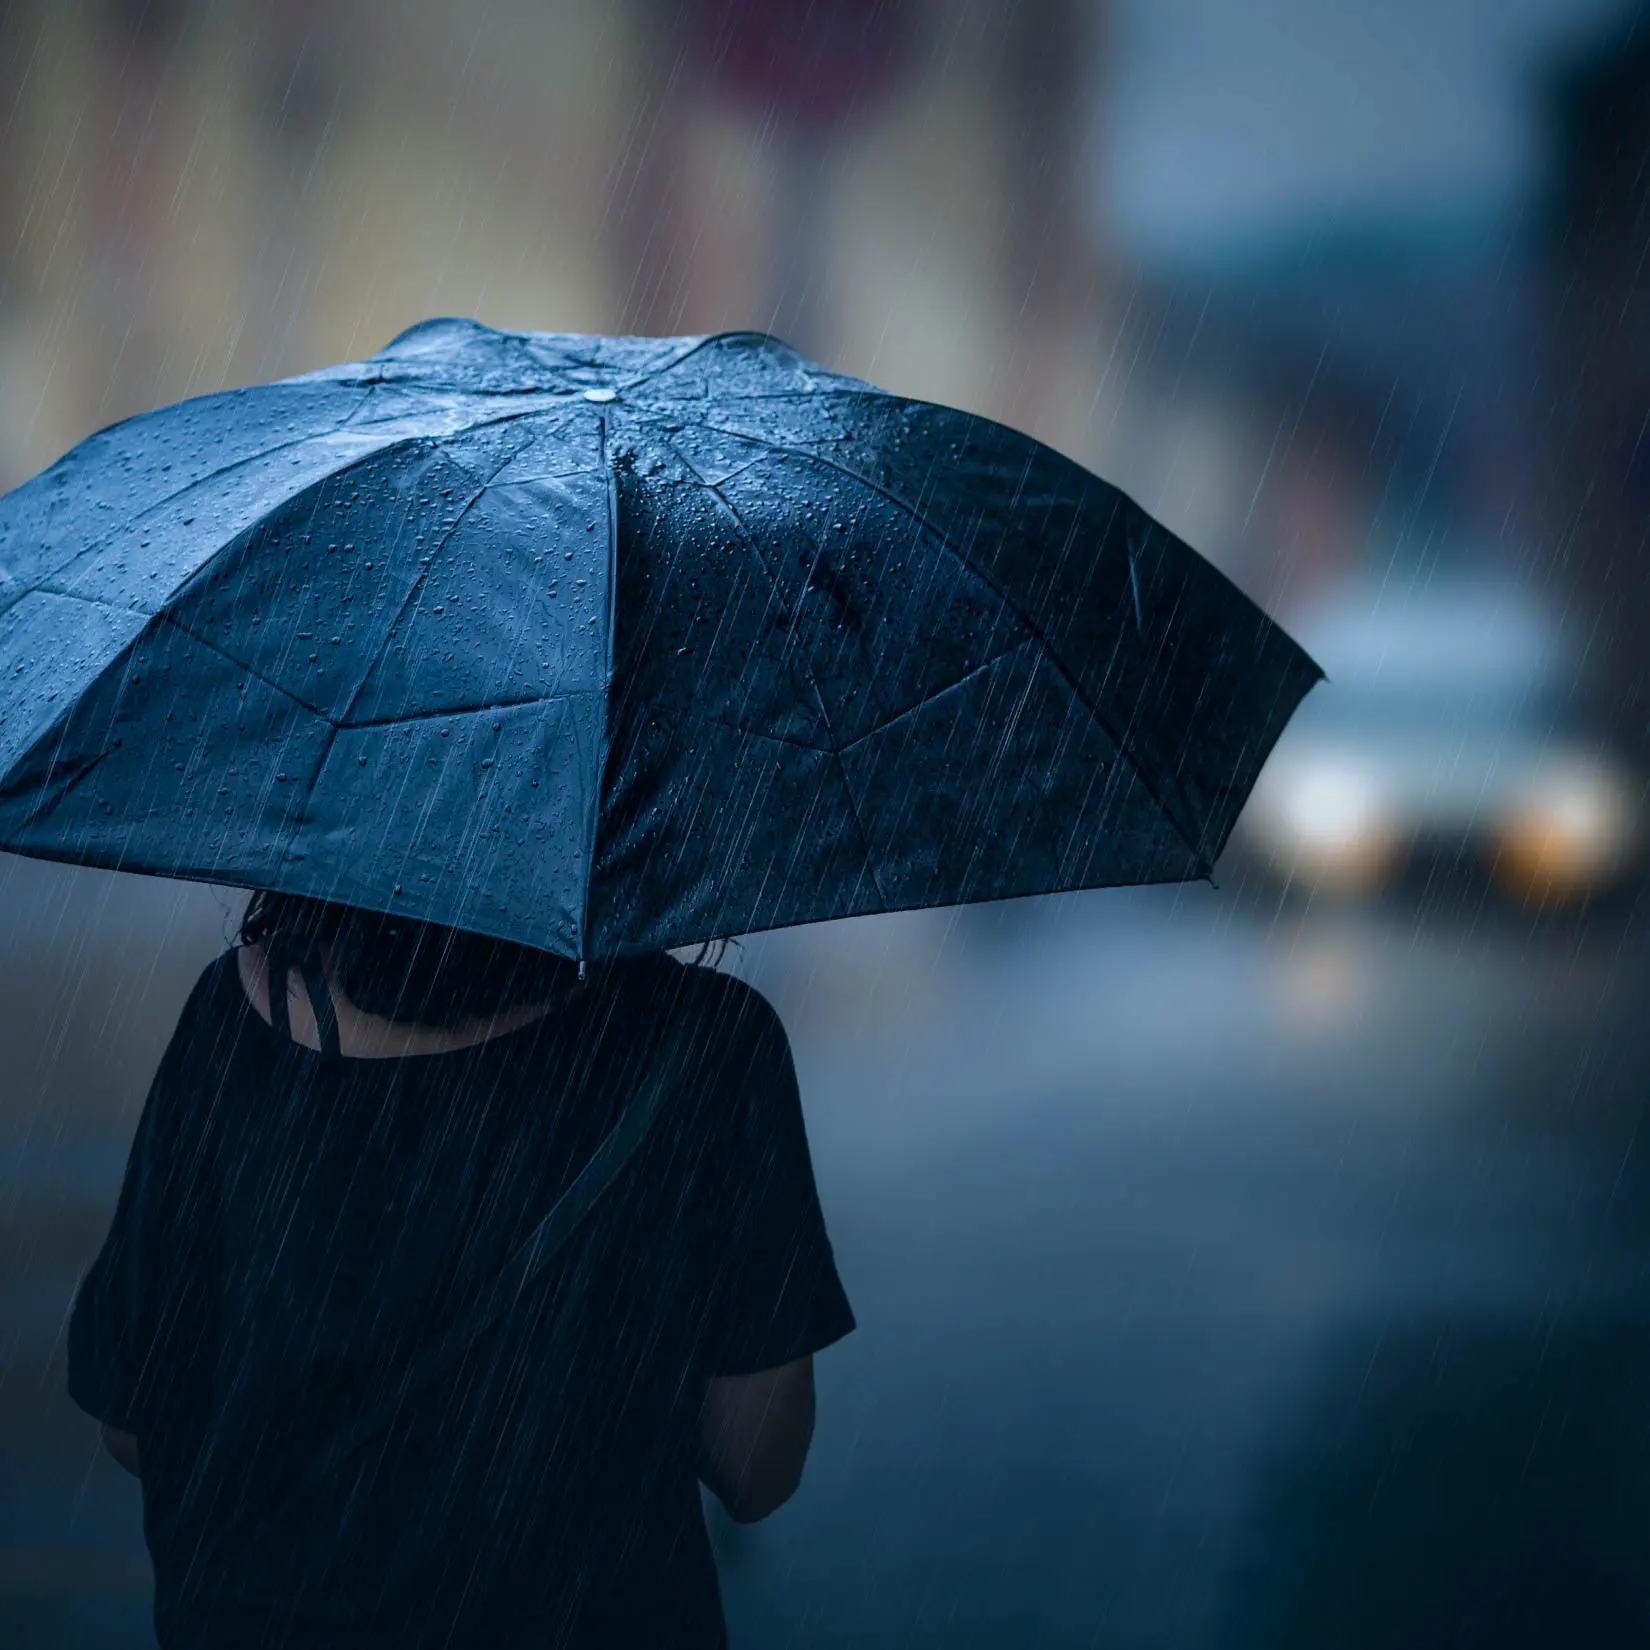 Image of person holding umbrella in storm